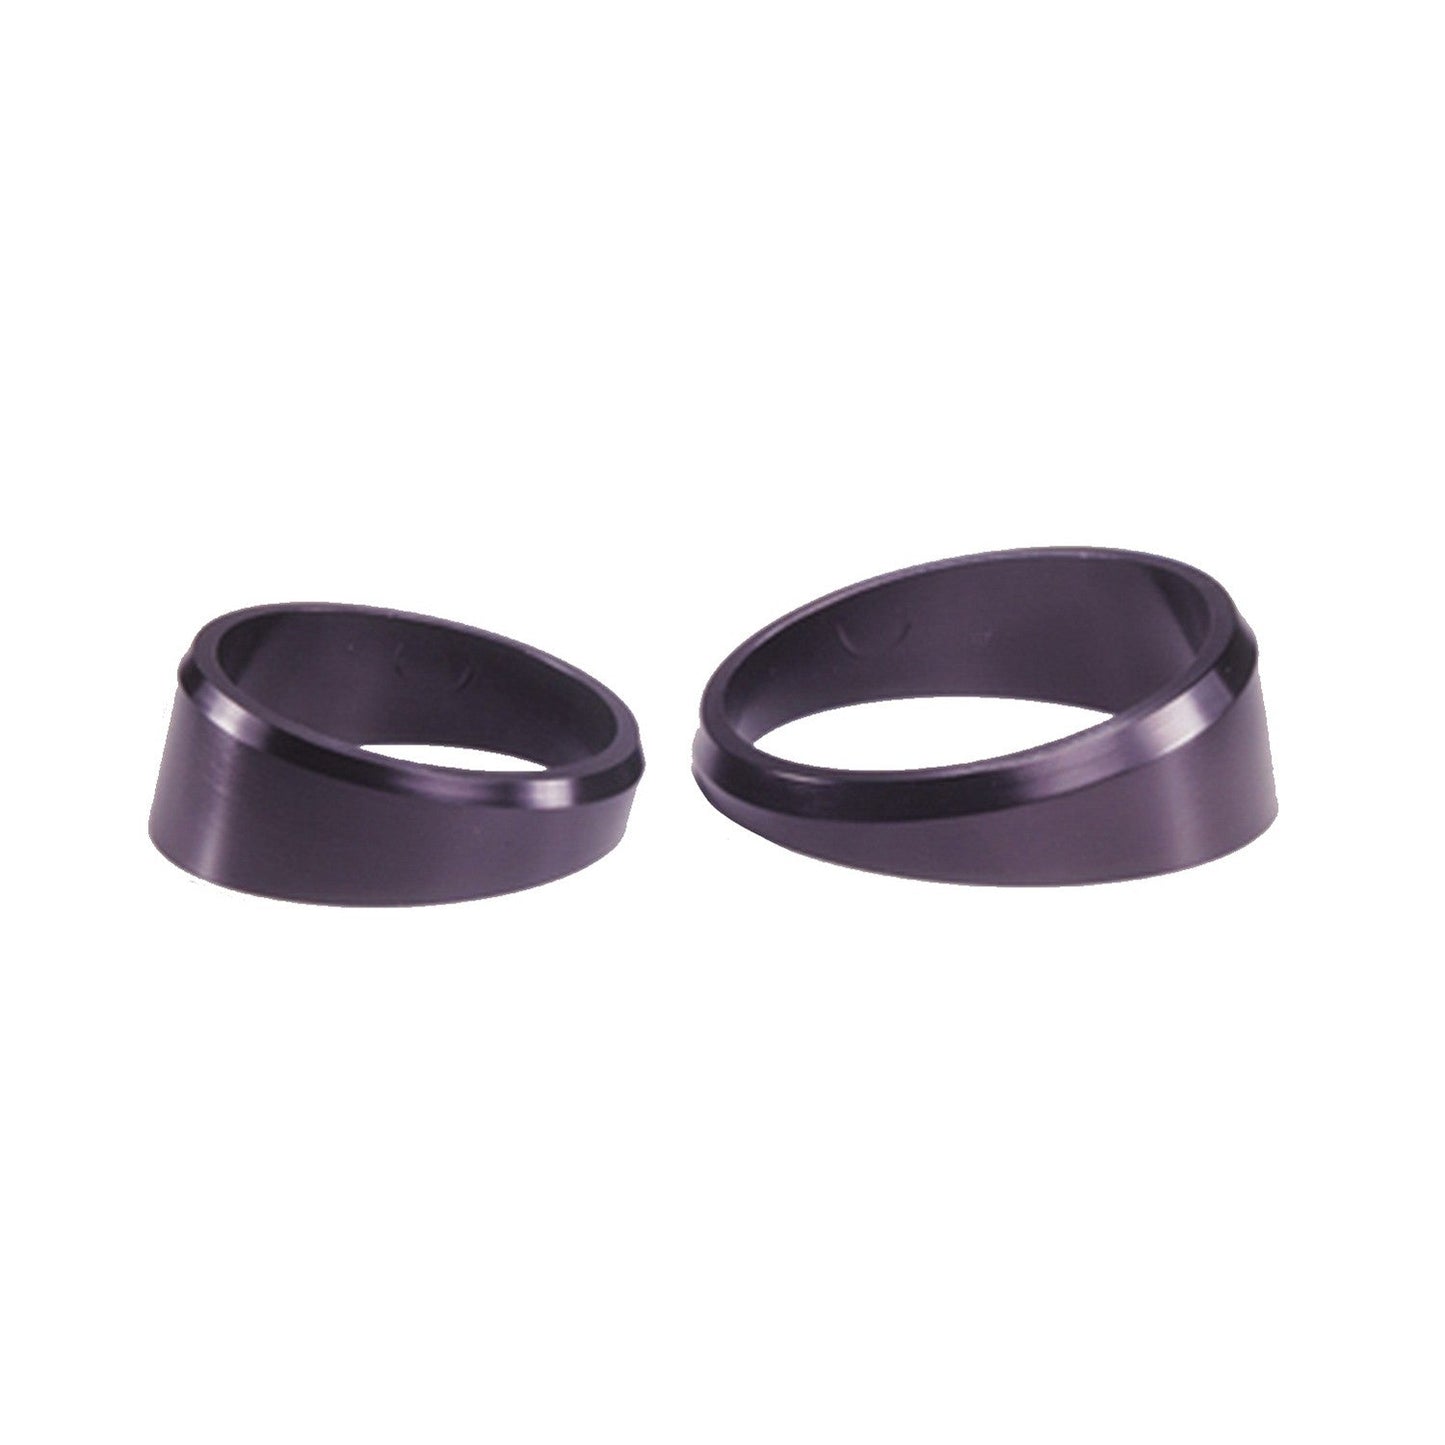 Auto Meter - ANGLE RINGS, 3 PCS., BLACK, FOR 2-1/16" GAUGES (2234)